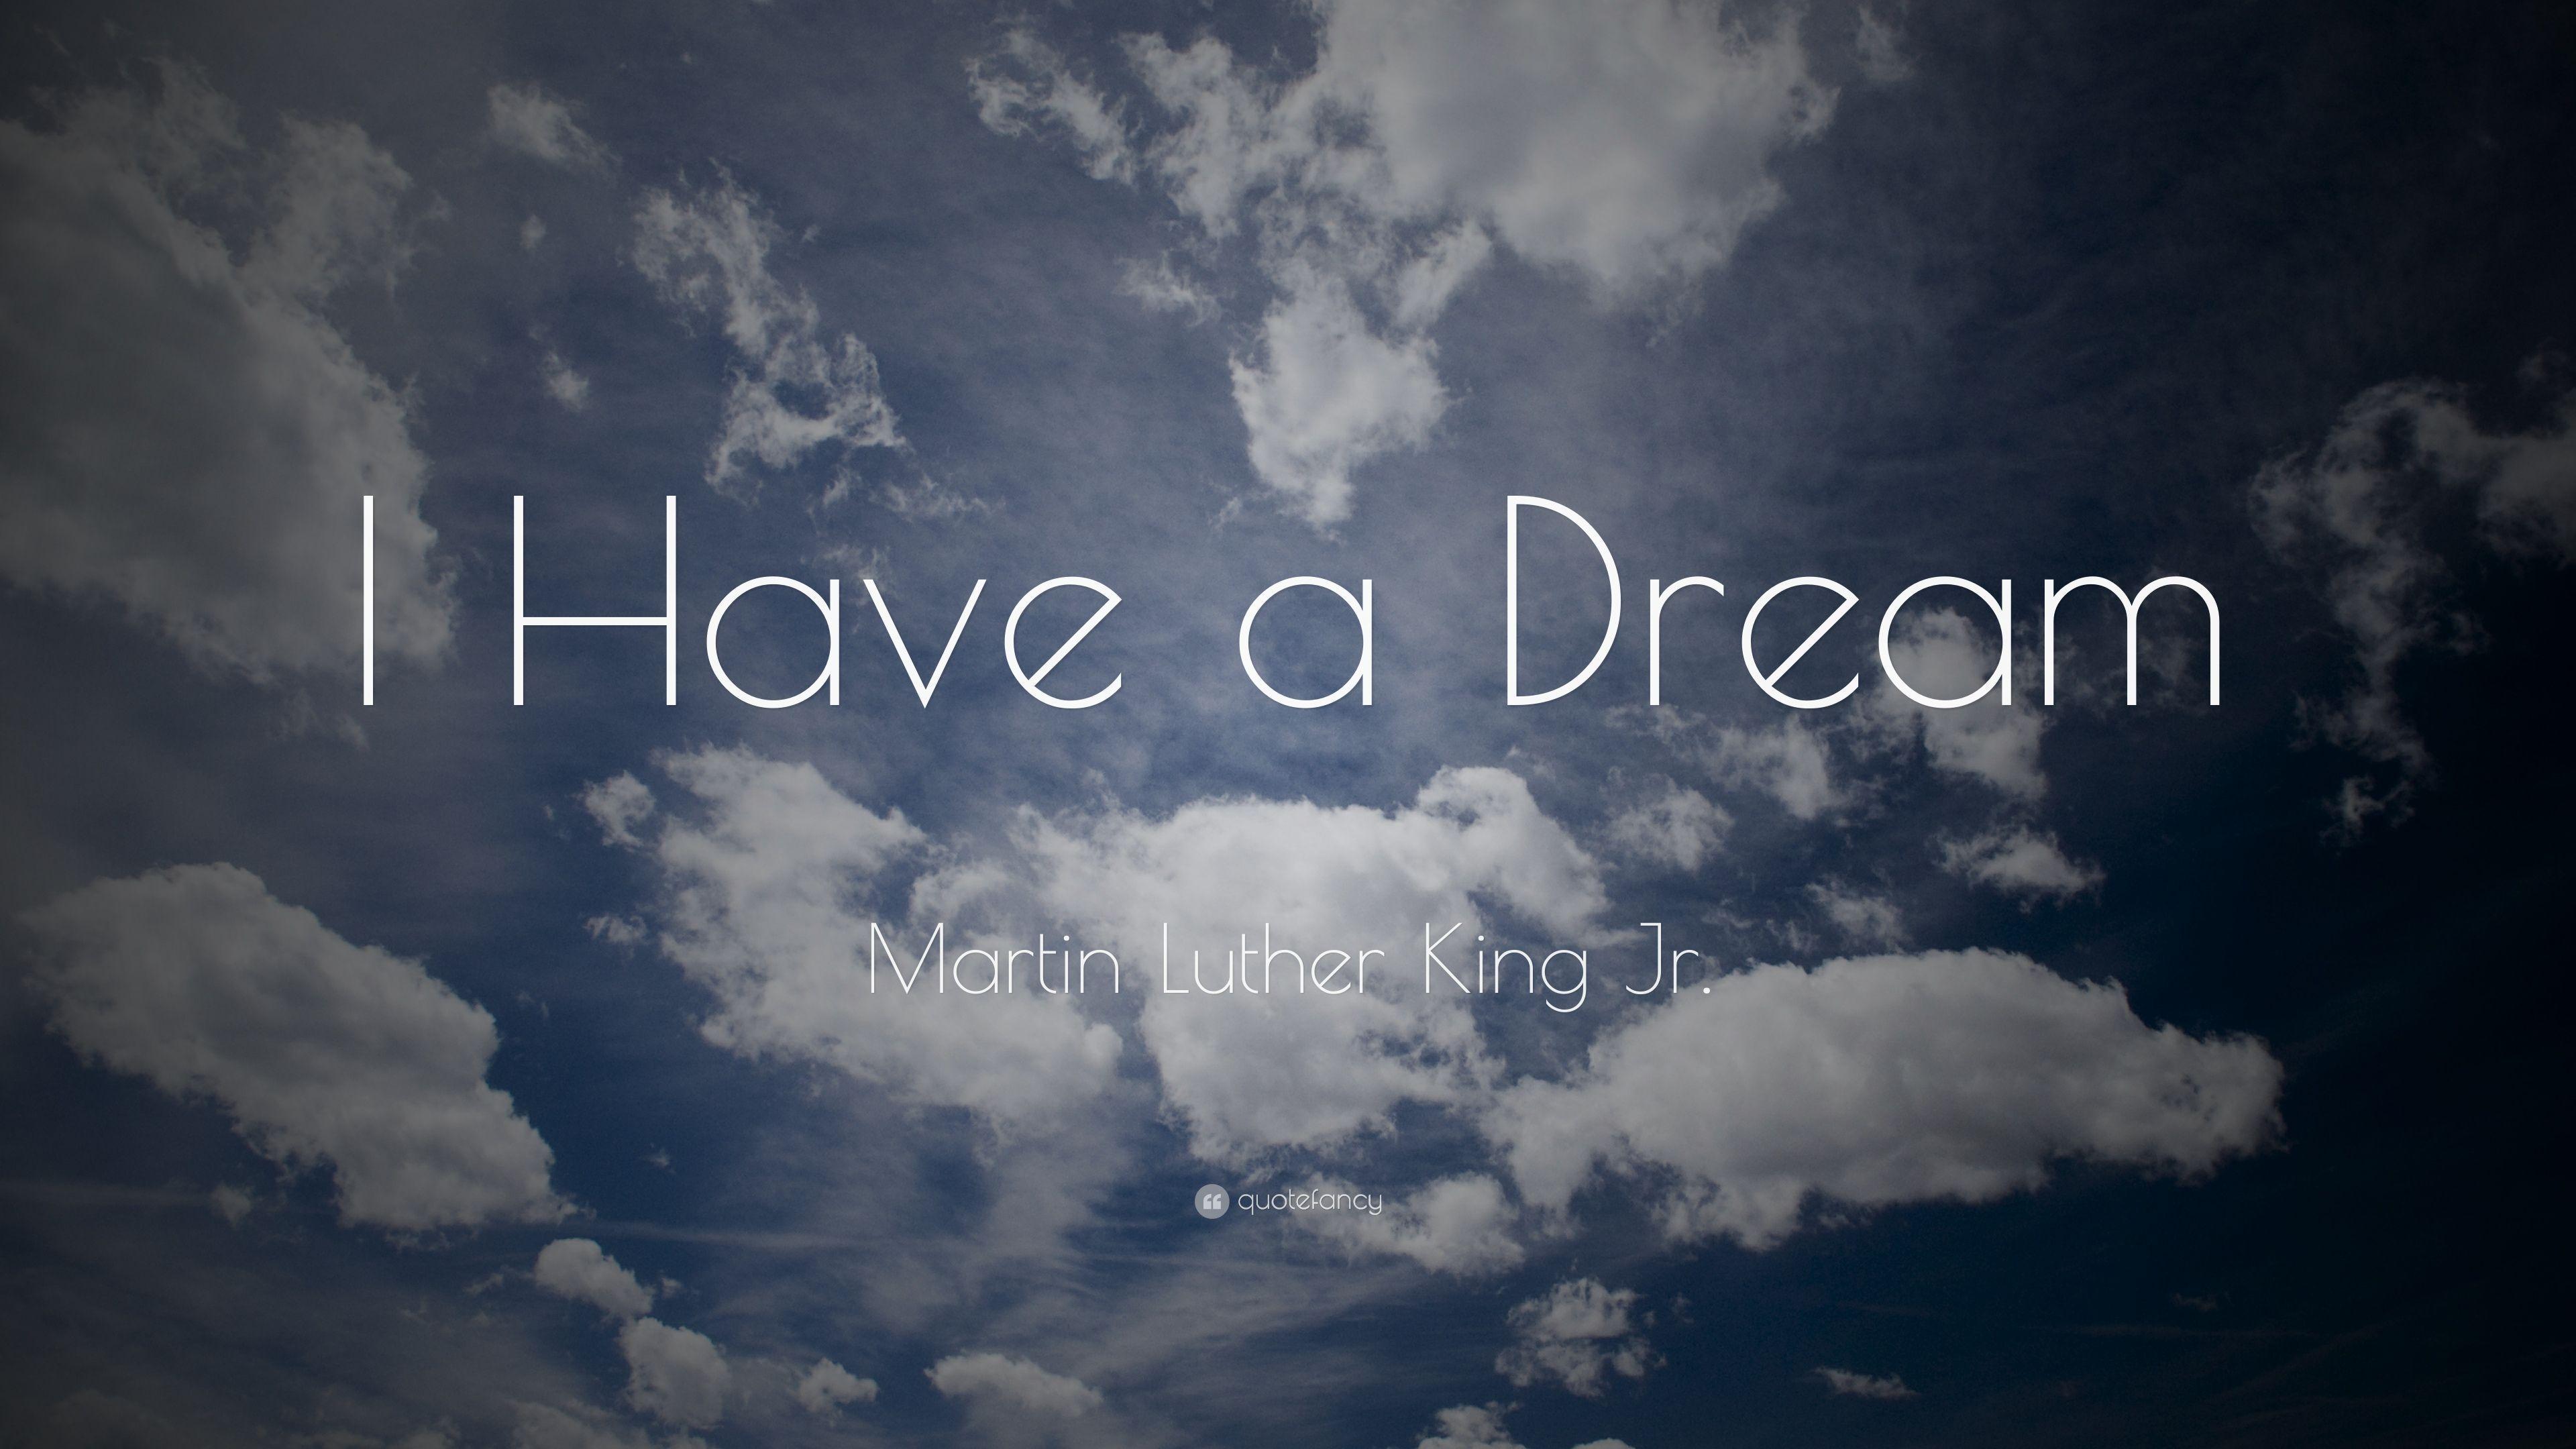 Martin Luther King Jr. Quote: “I Have a Dream” 12 wallpaper